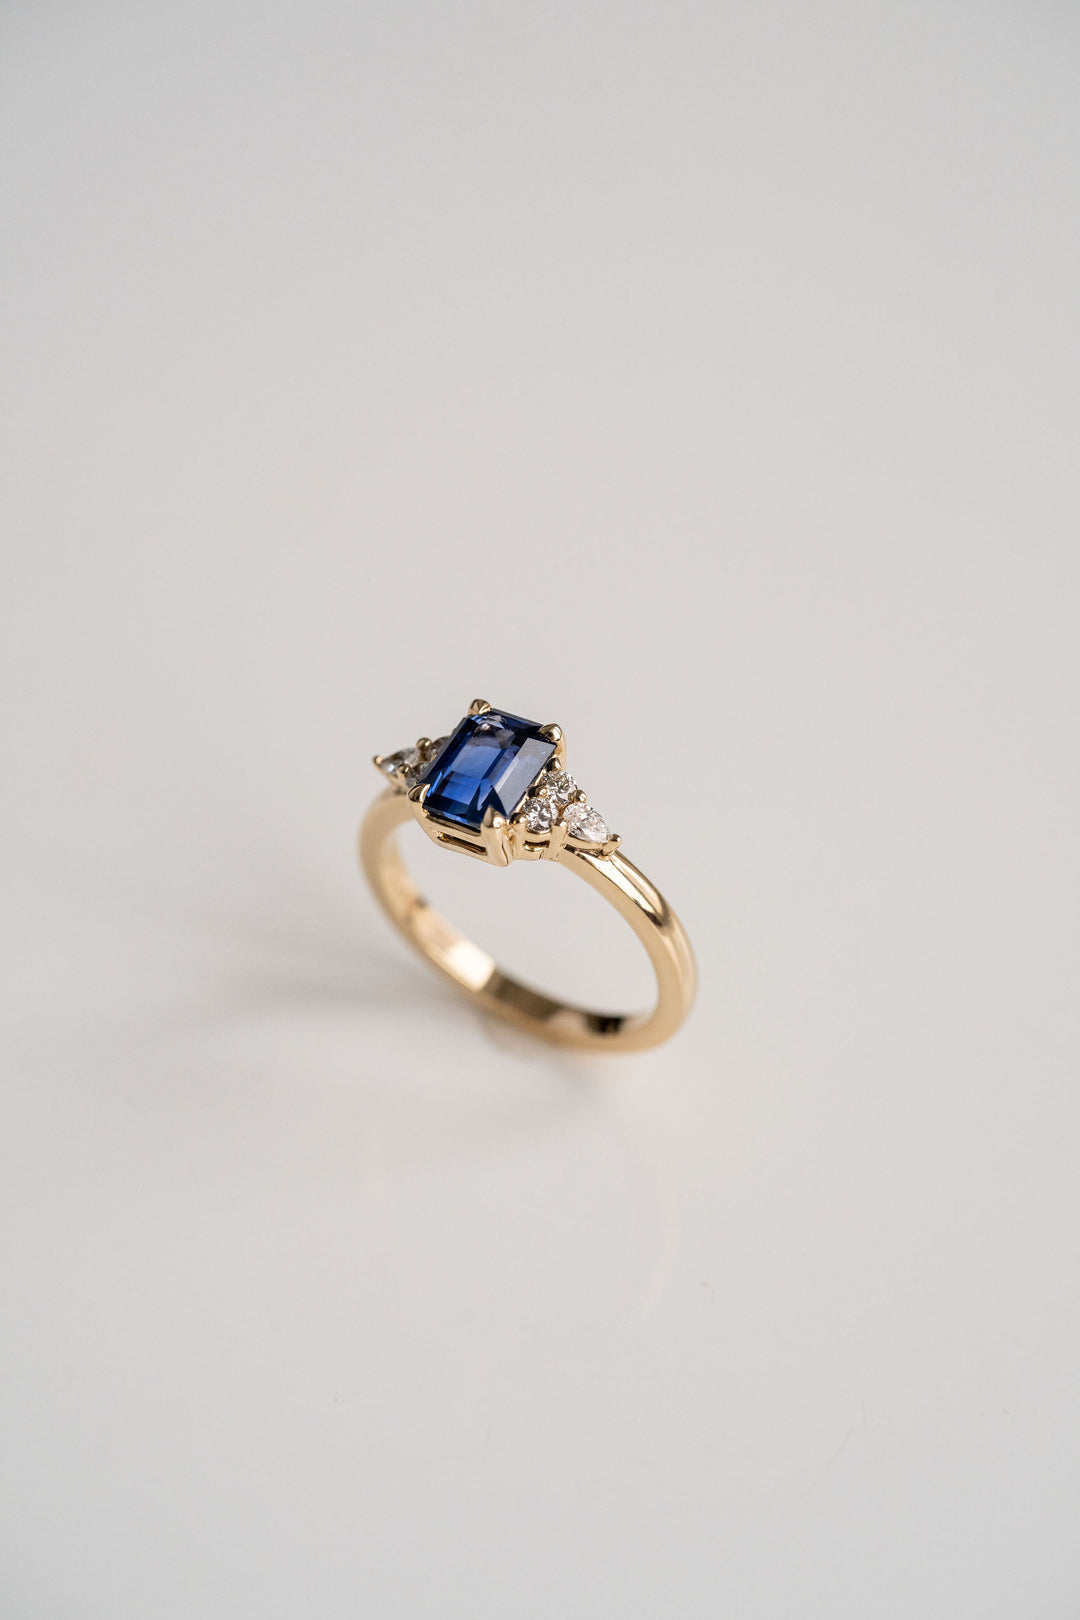 1.60ct. Emerald Cut Blue Sri Lankan Sapphire Engagement Ring With Diamond Cluster Accents, 14k Yellow Gold